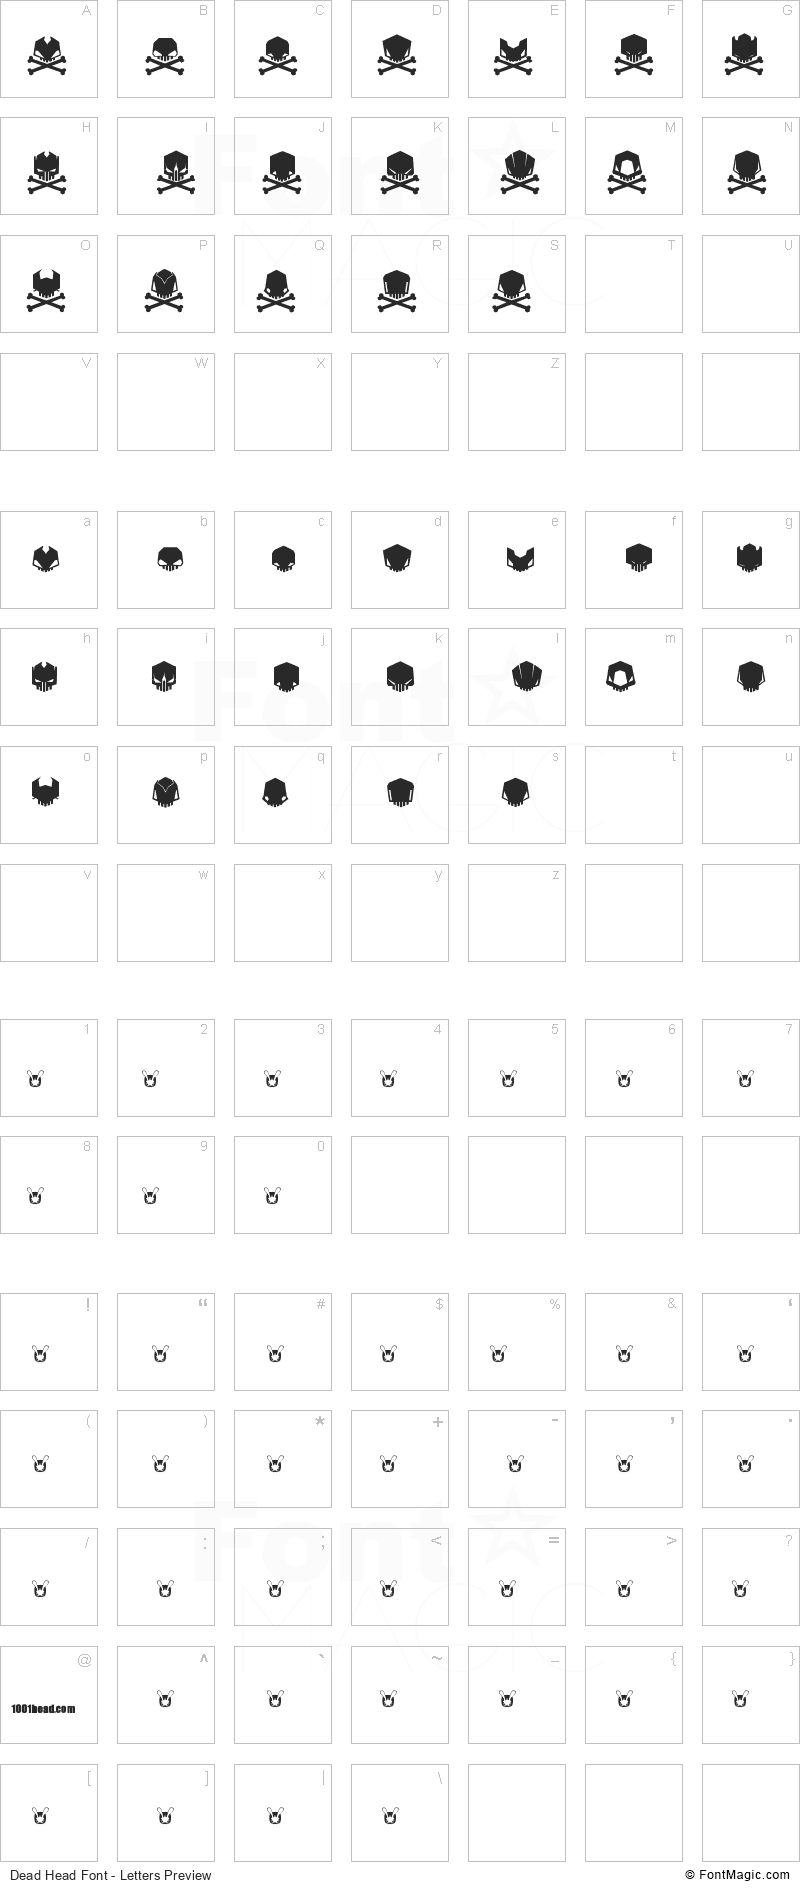 Dead Head Font - All Latters Preview Chart